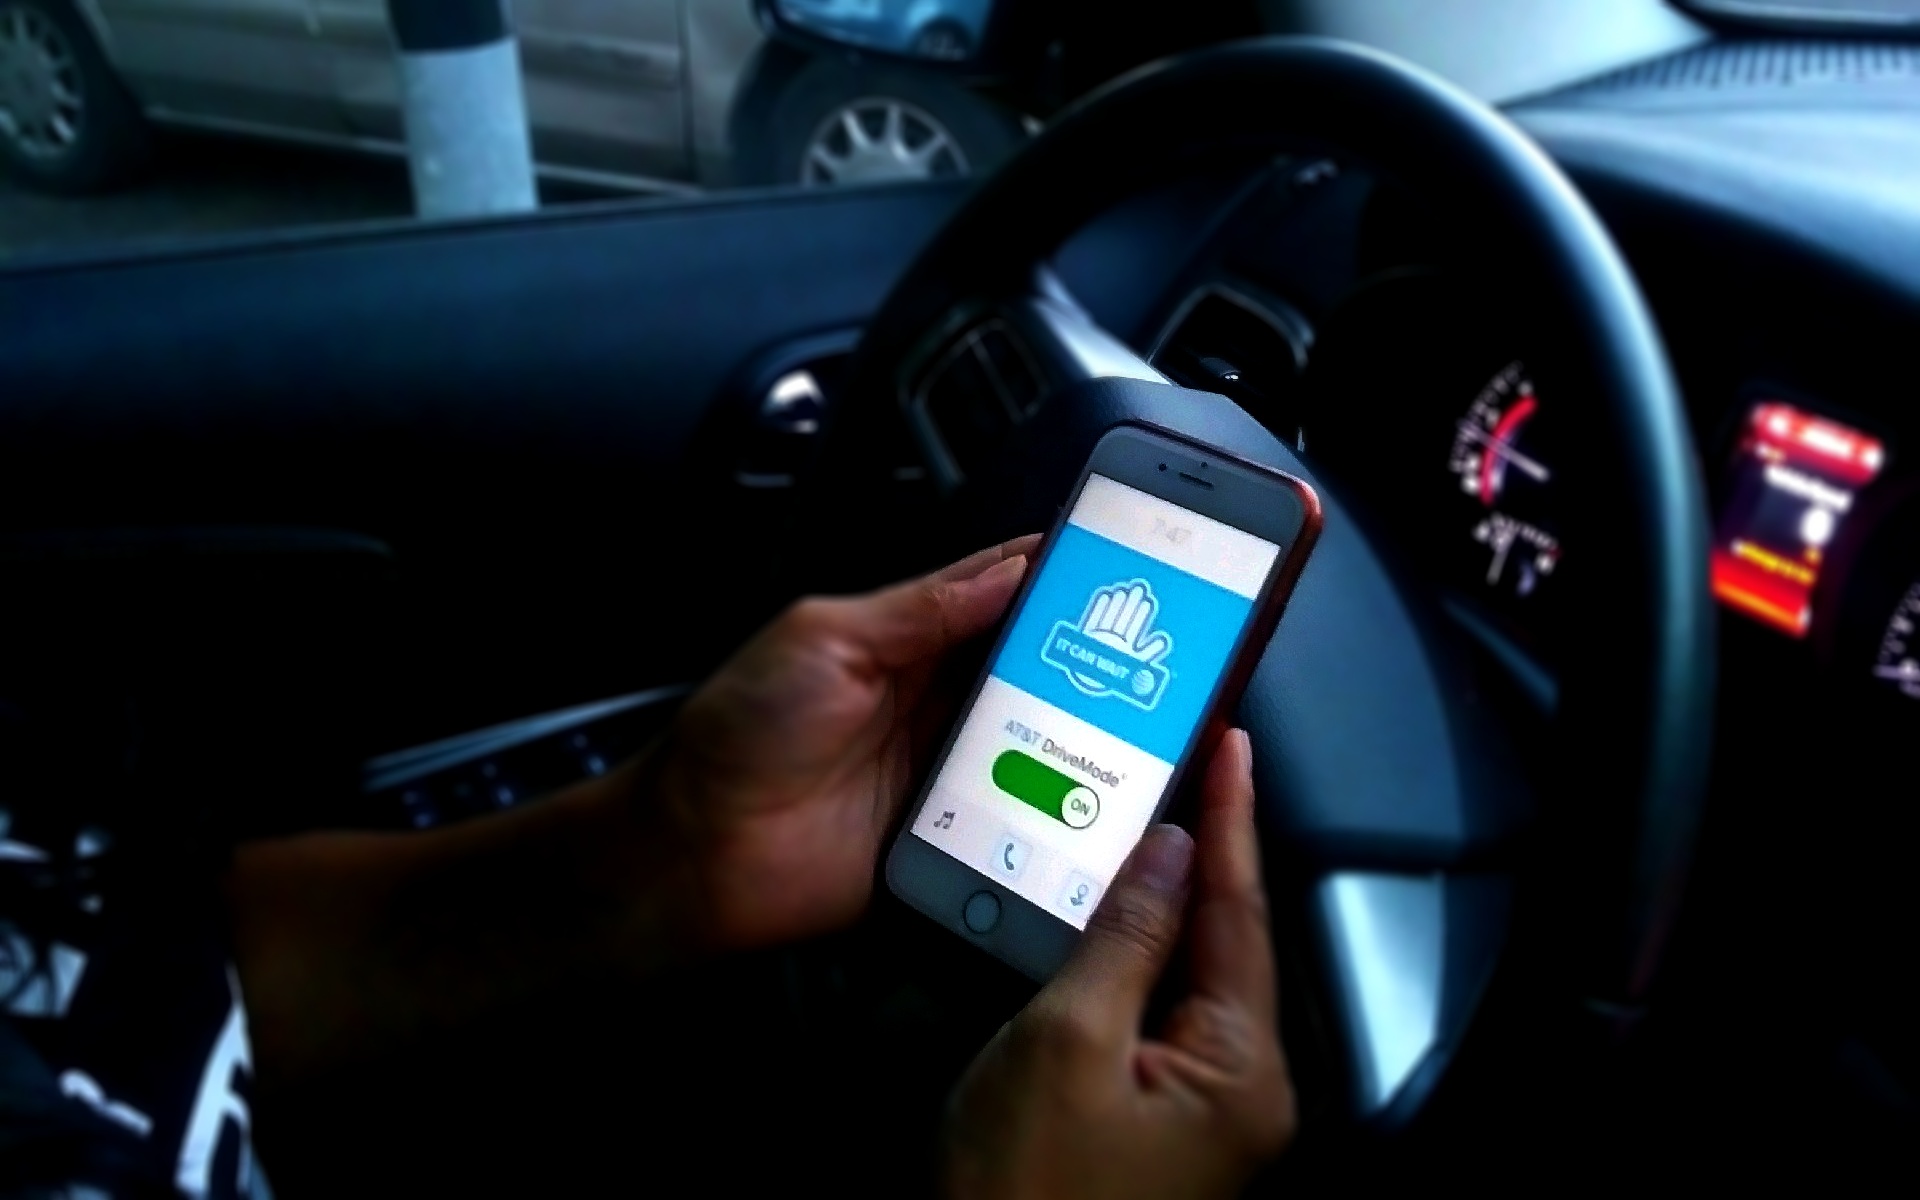 Take the AT&T It Can Wait Pledge Against Distracted Driving